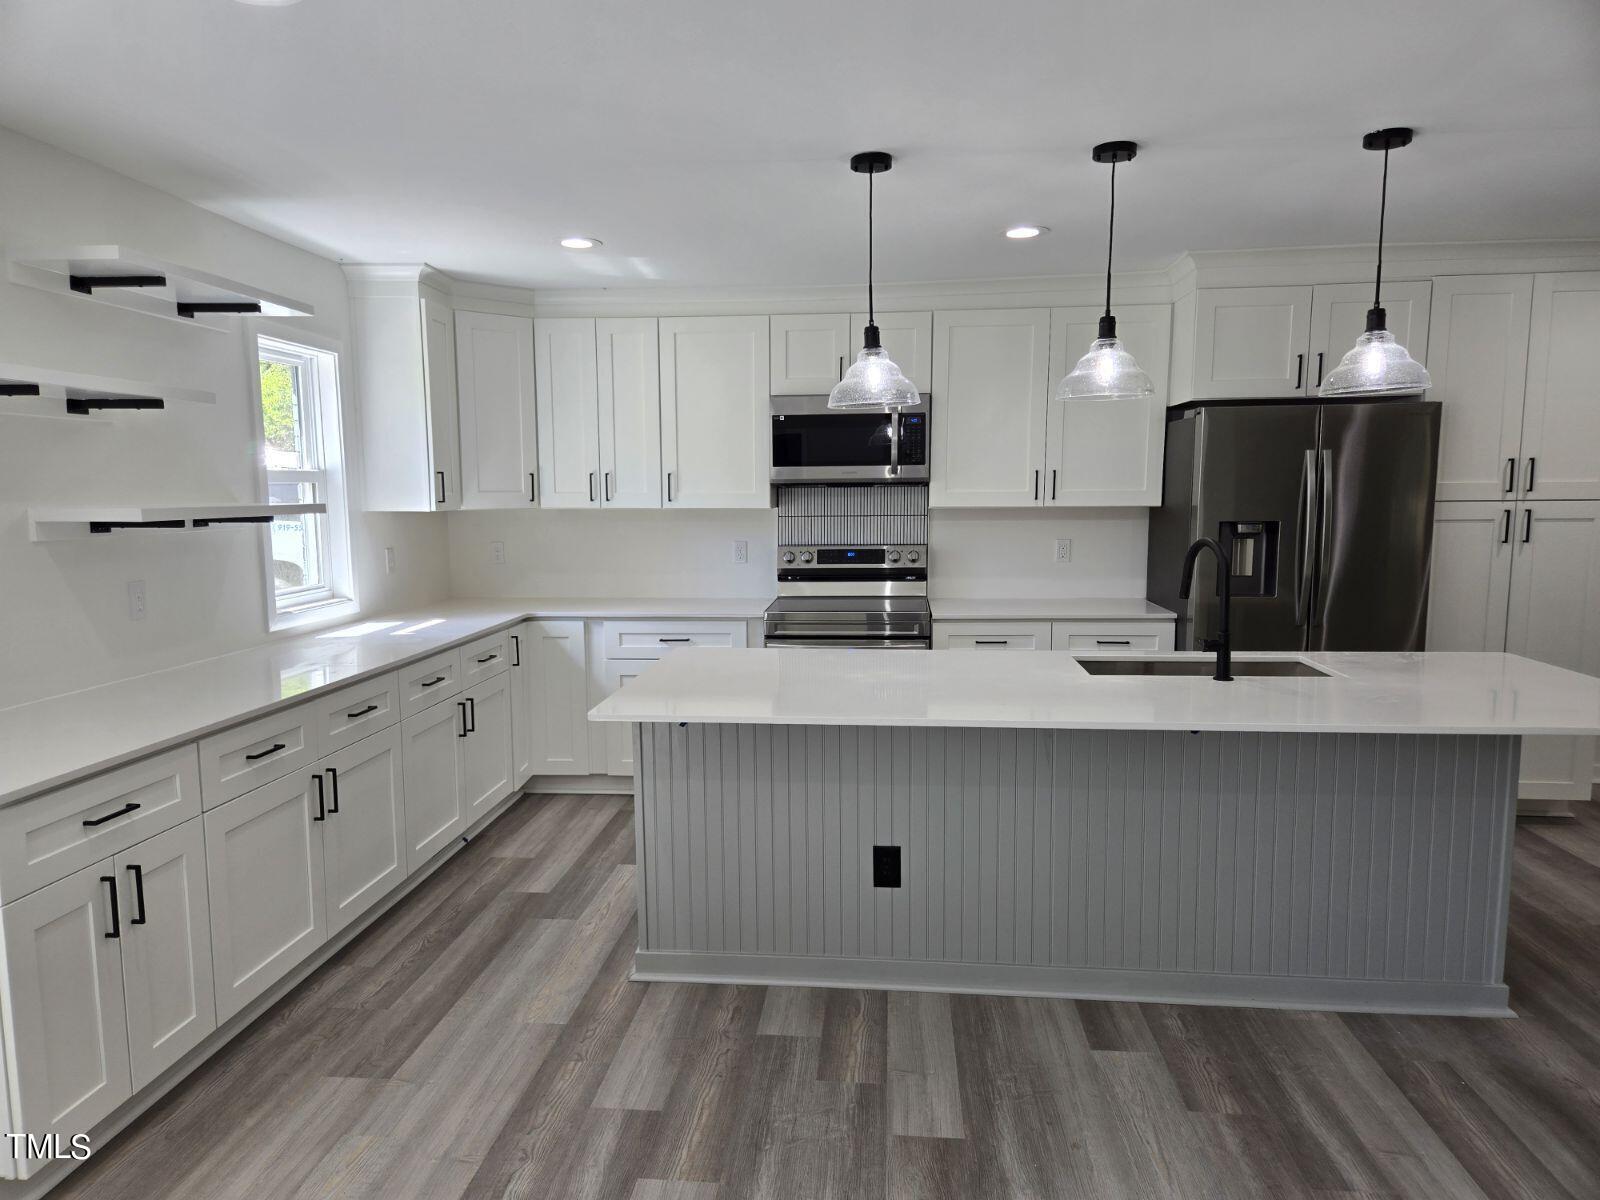 a kitchen with kitchen island white cabinets and sink